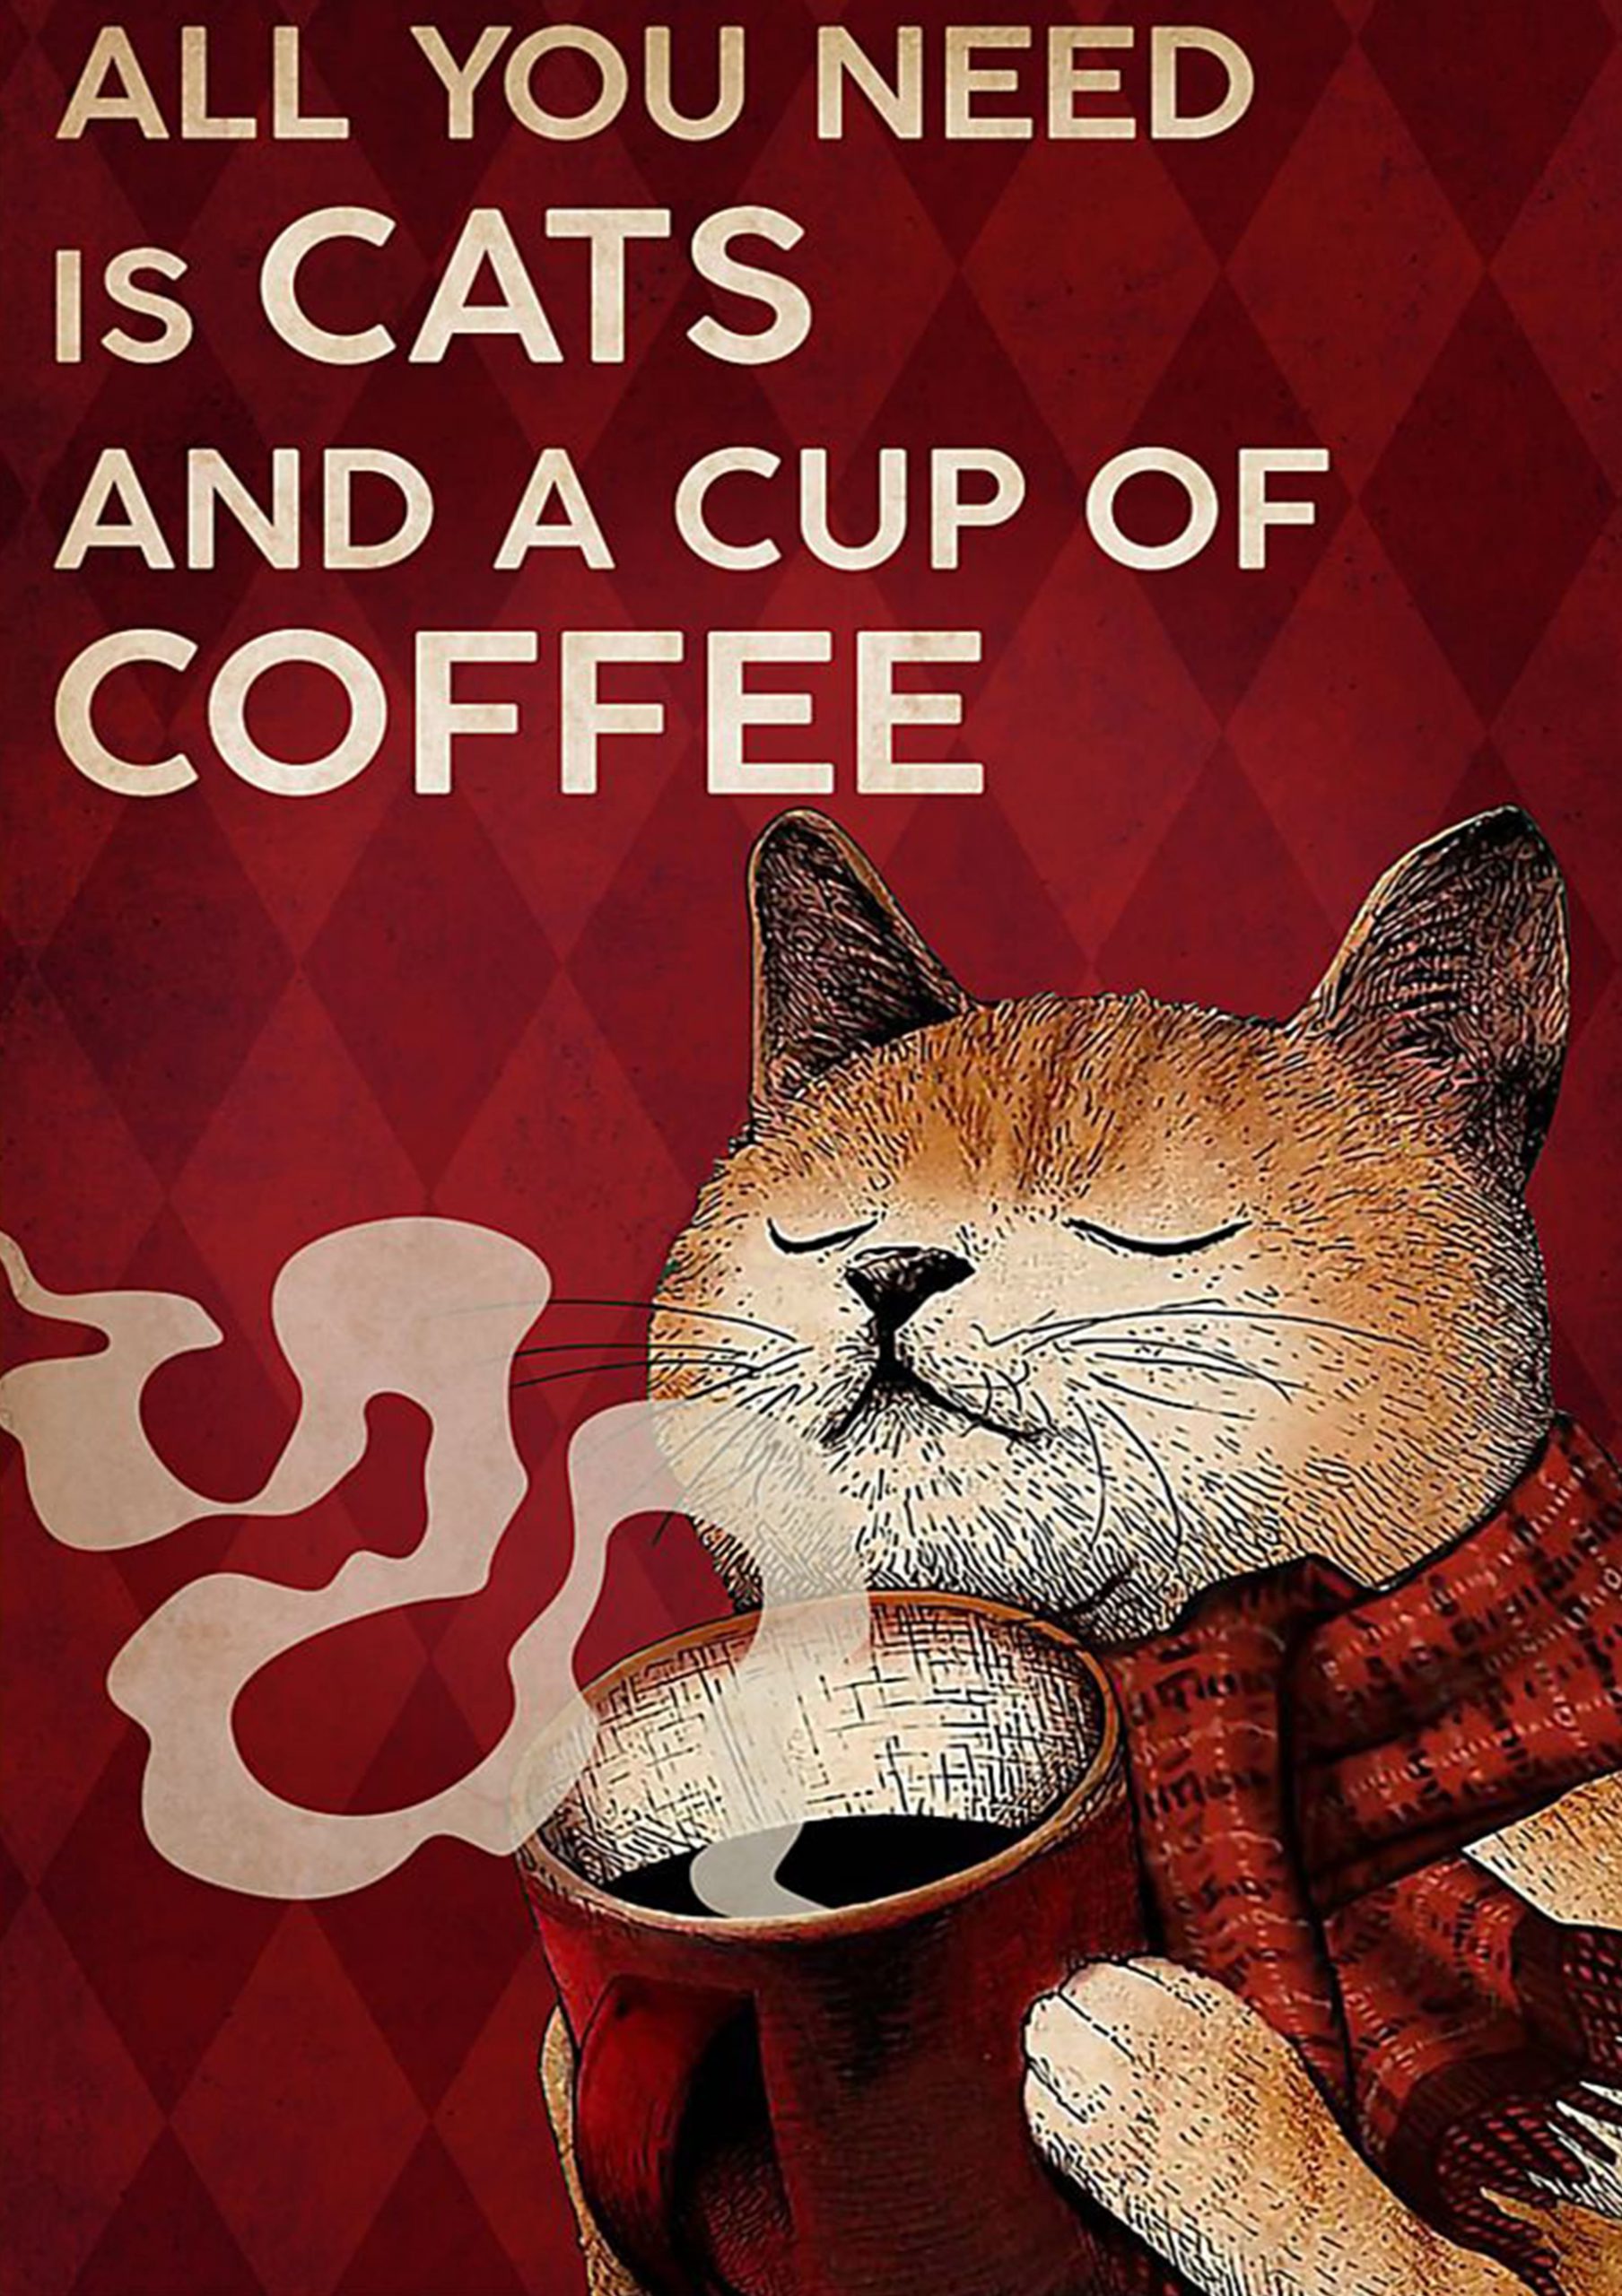 vintage all you need is cats and a cup of coffee poster 1 - Copy (2)